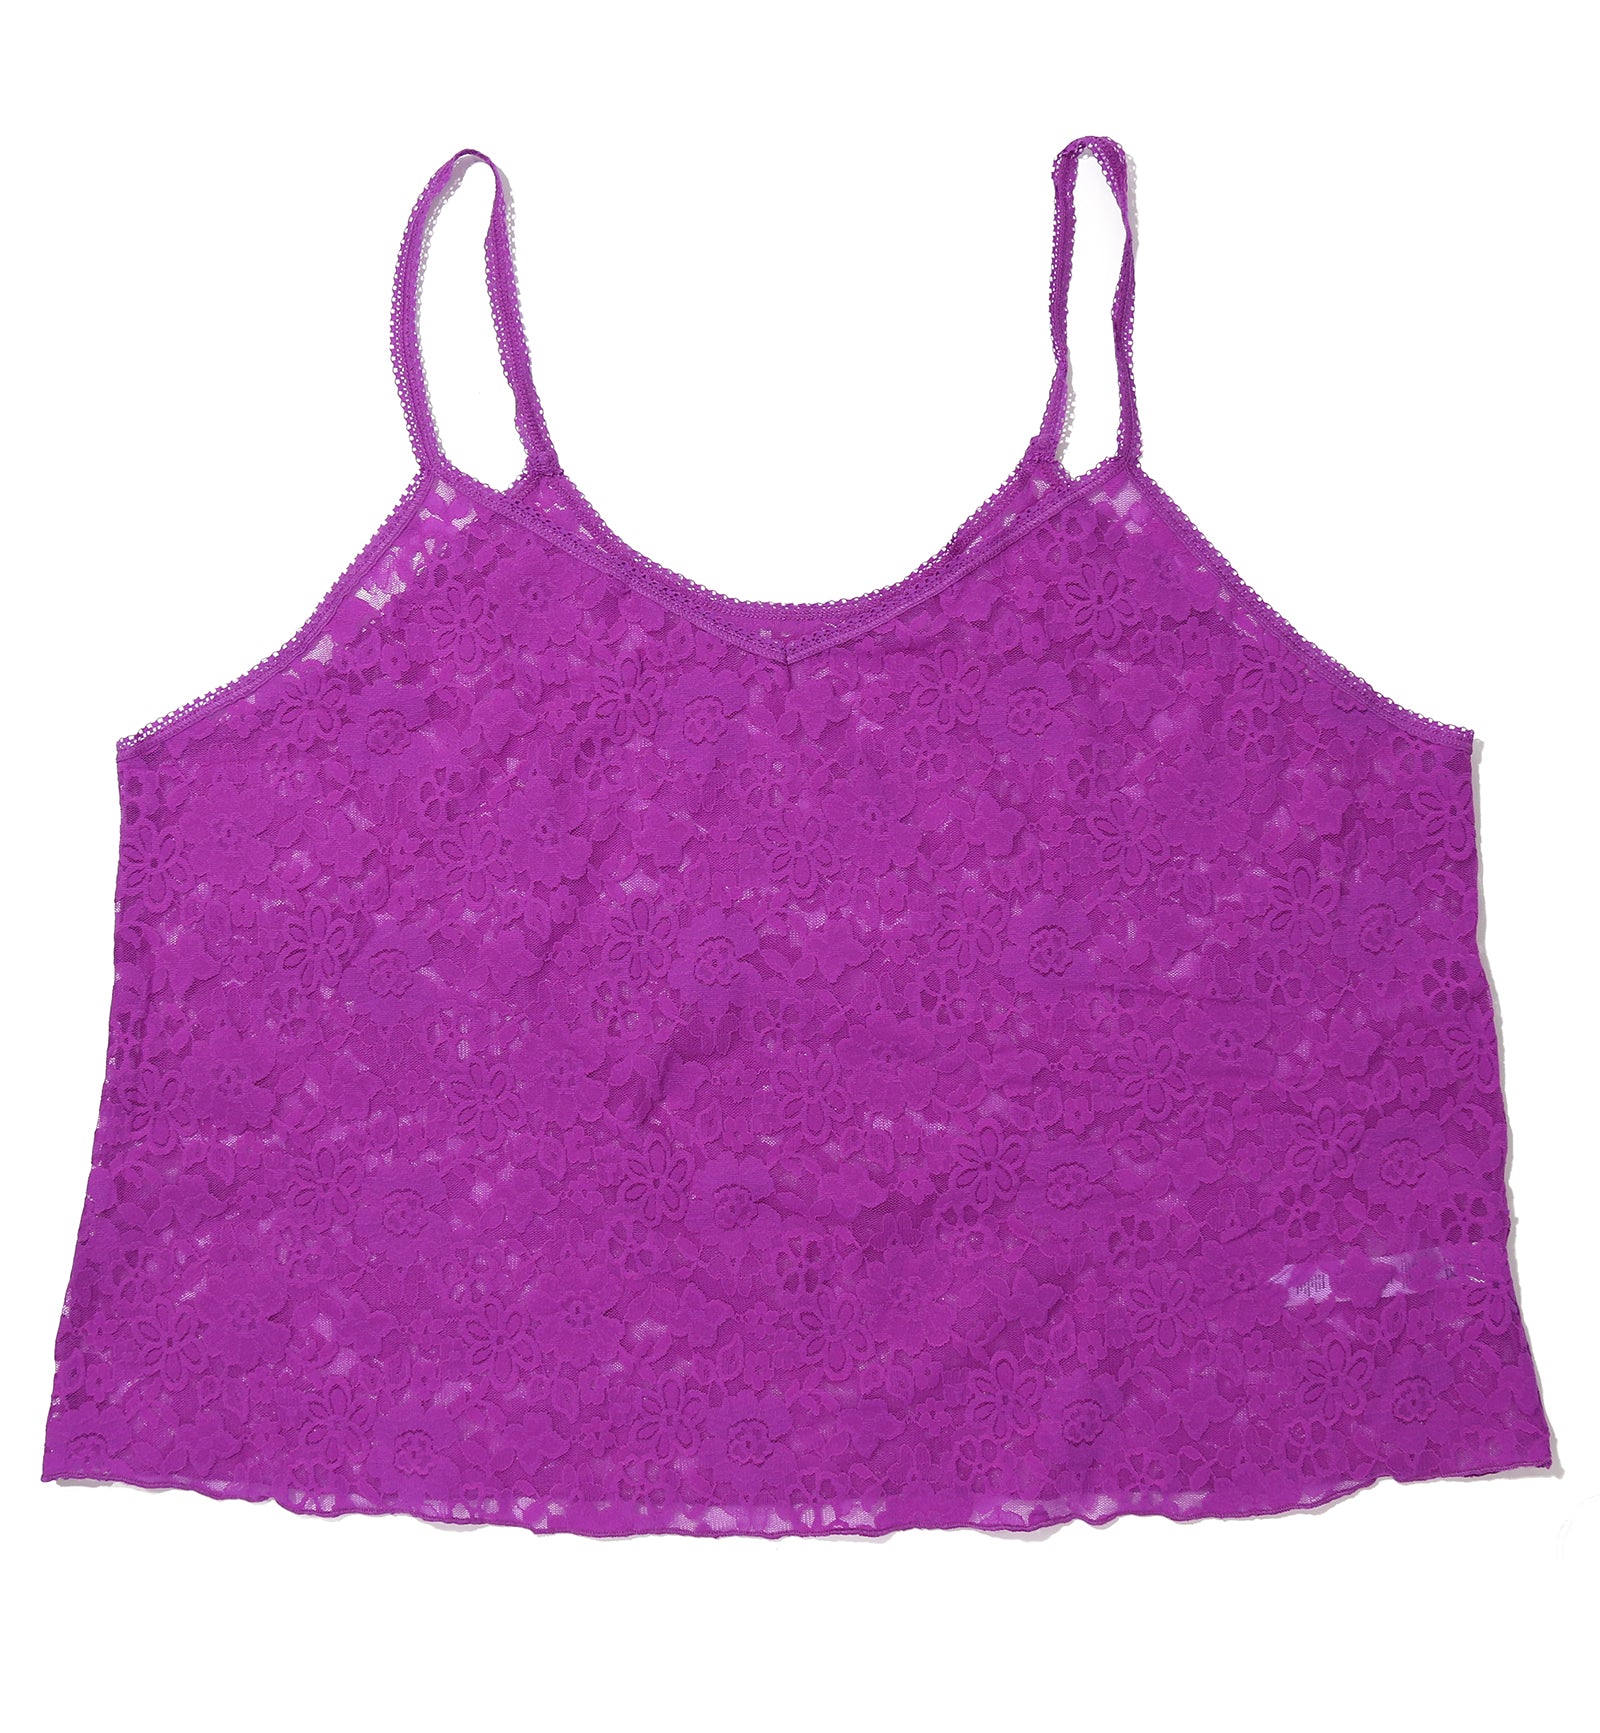 Hanky Panky Daily Lace Camisole PLUS (774731X),1X,Aster Garland - Aster Garland,1X